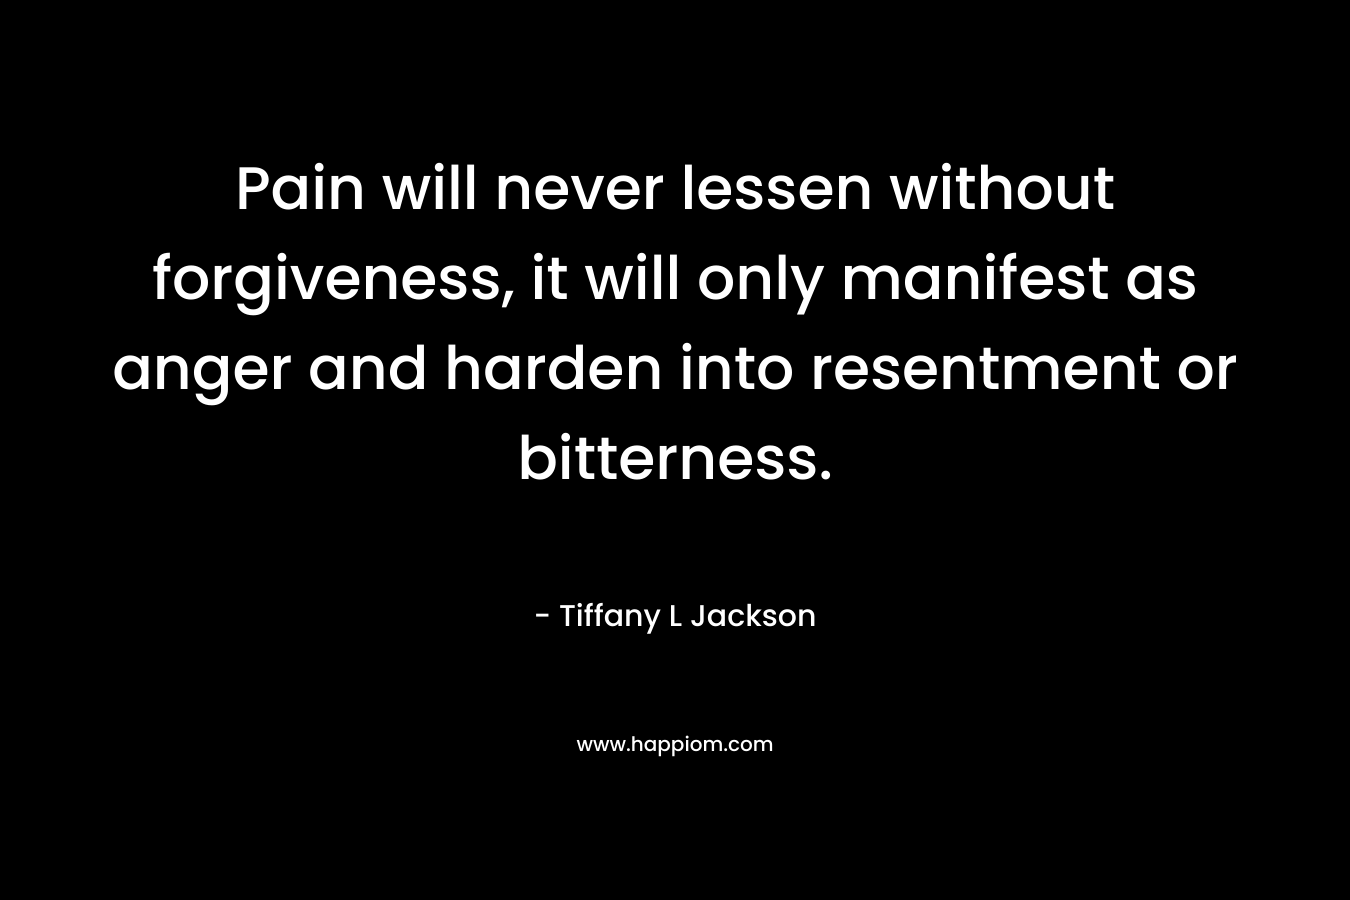 Pain will never lessen without forgiveness, it will only manifest as anger and harden into resentment or bitterness.